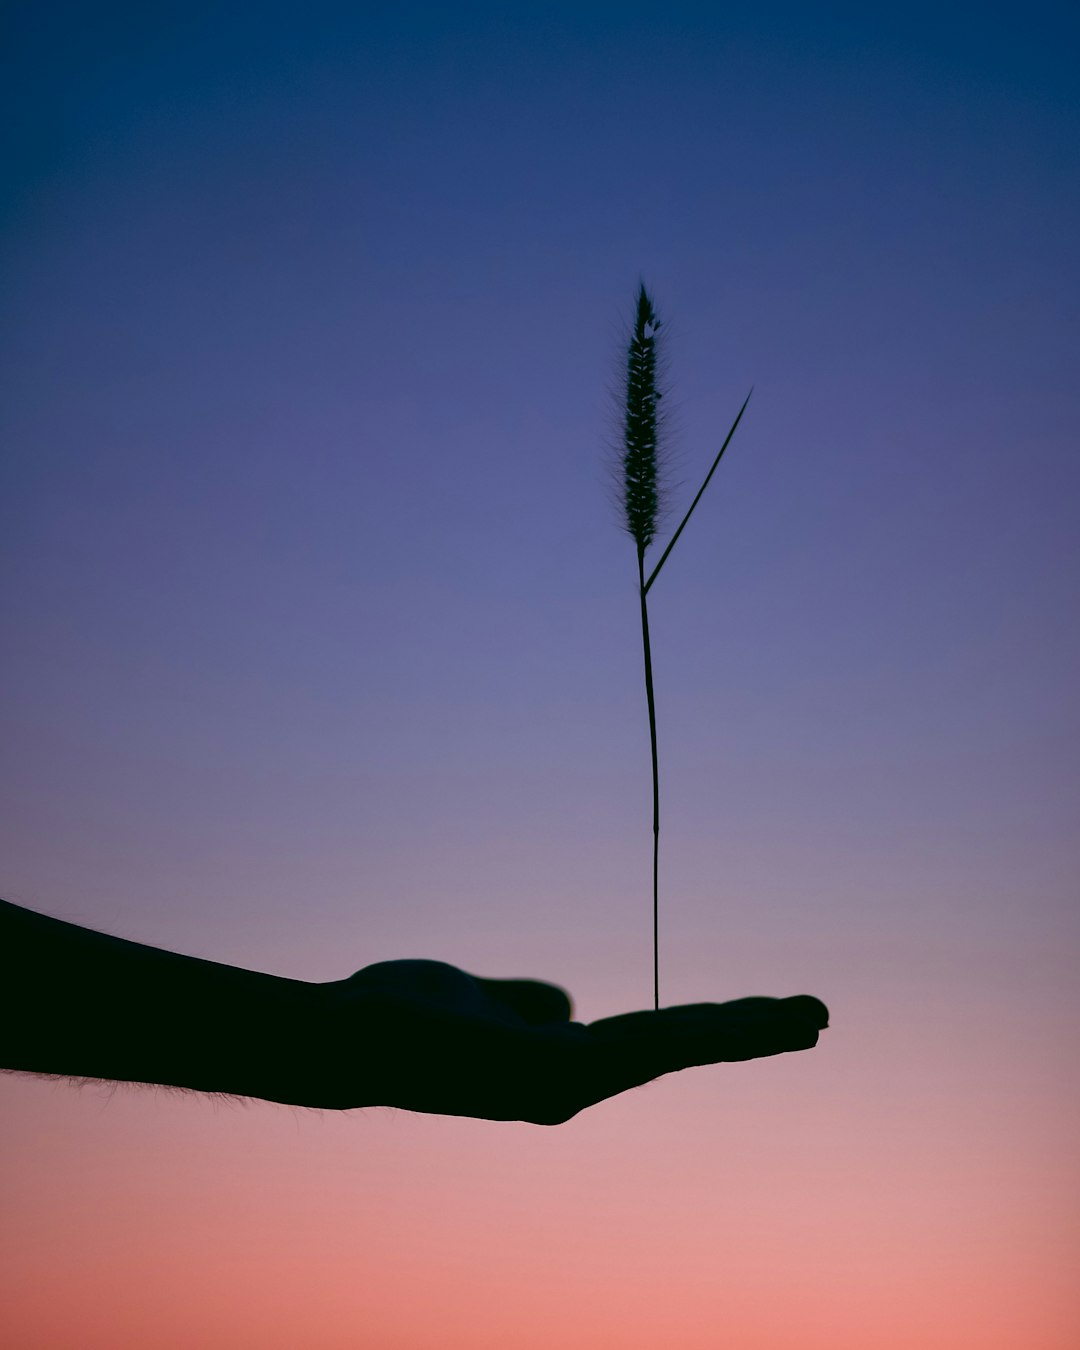  silhouette photography of person holding plant weighing balance